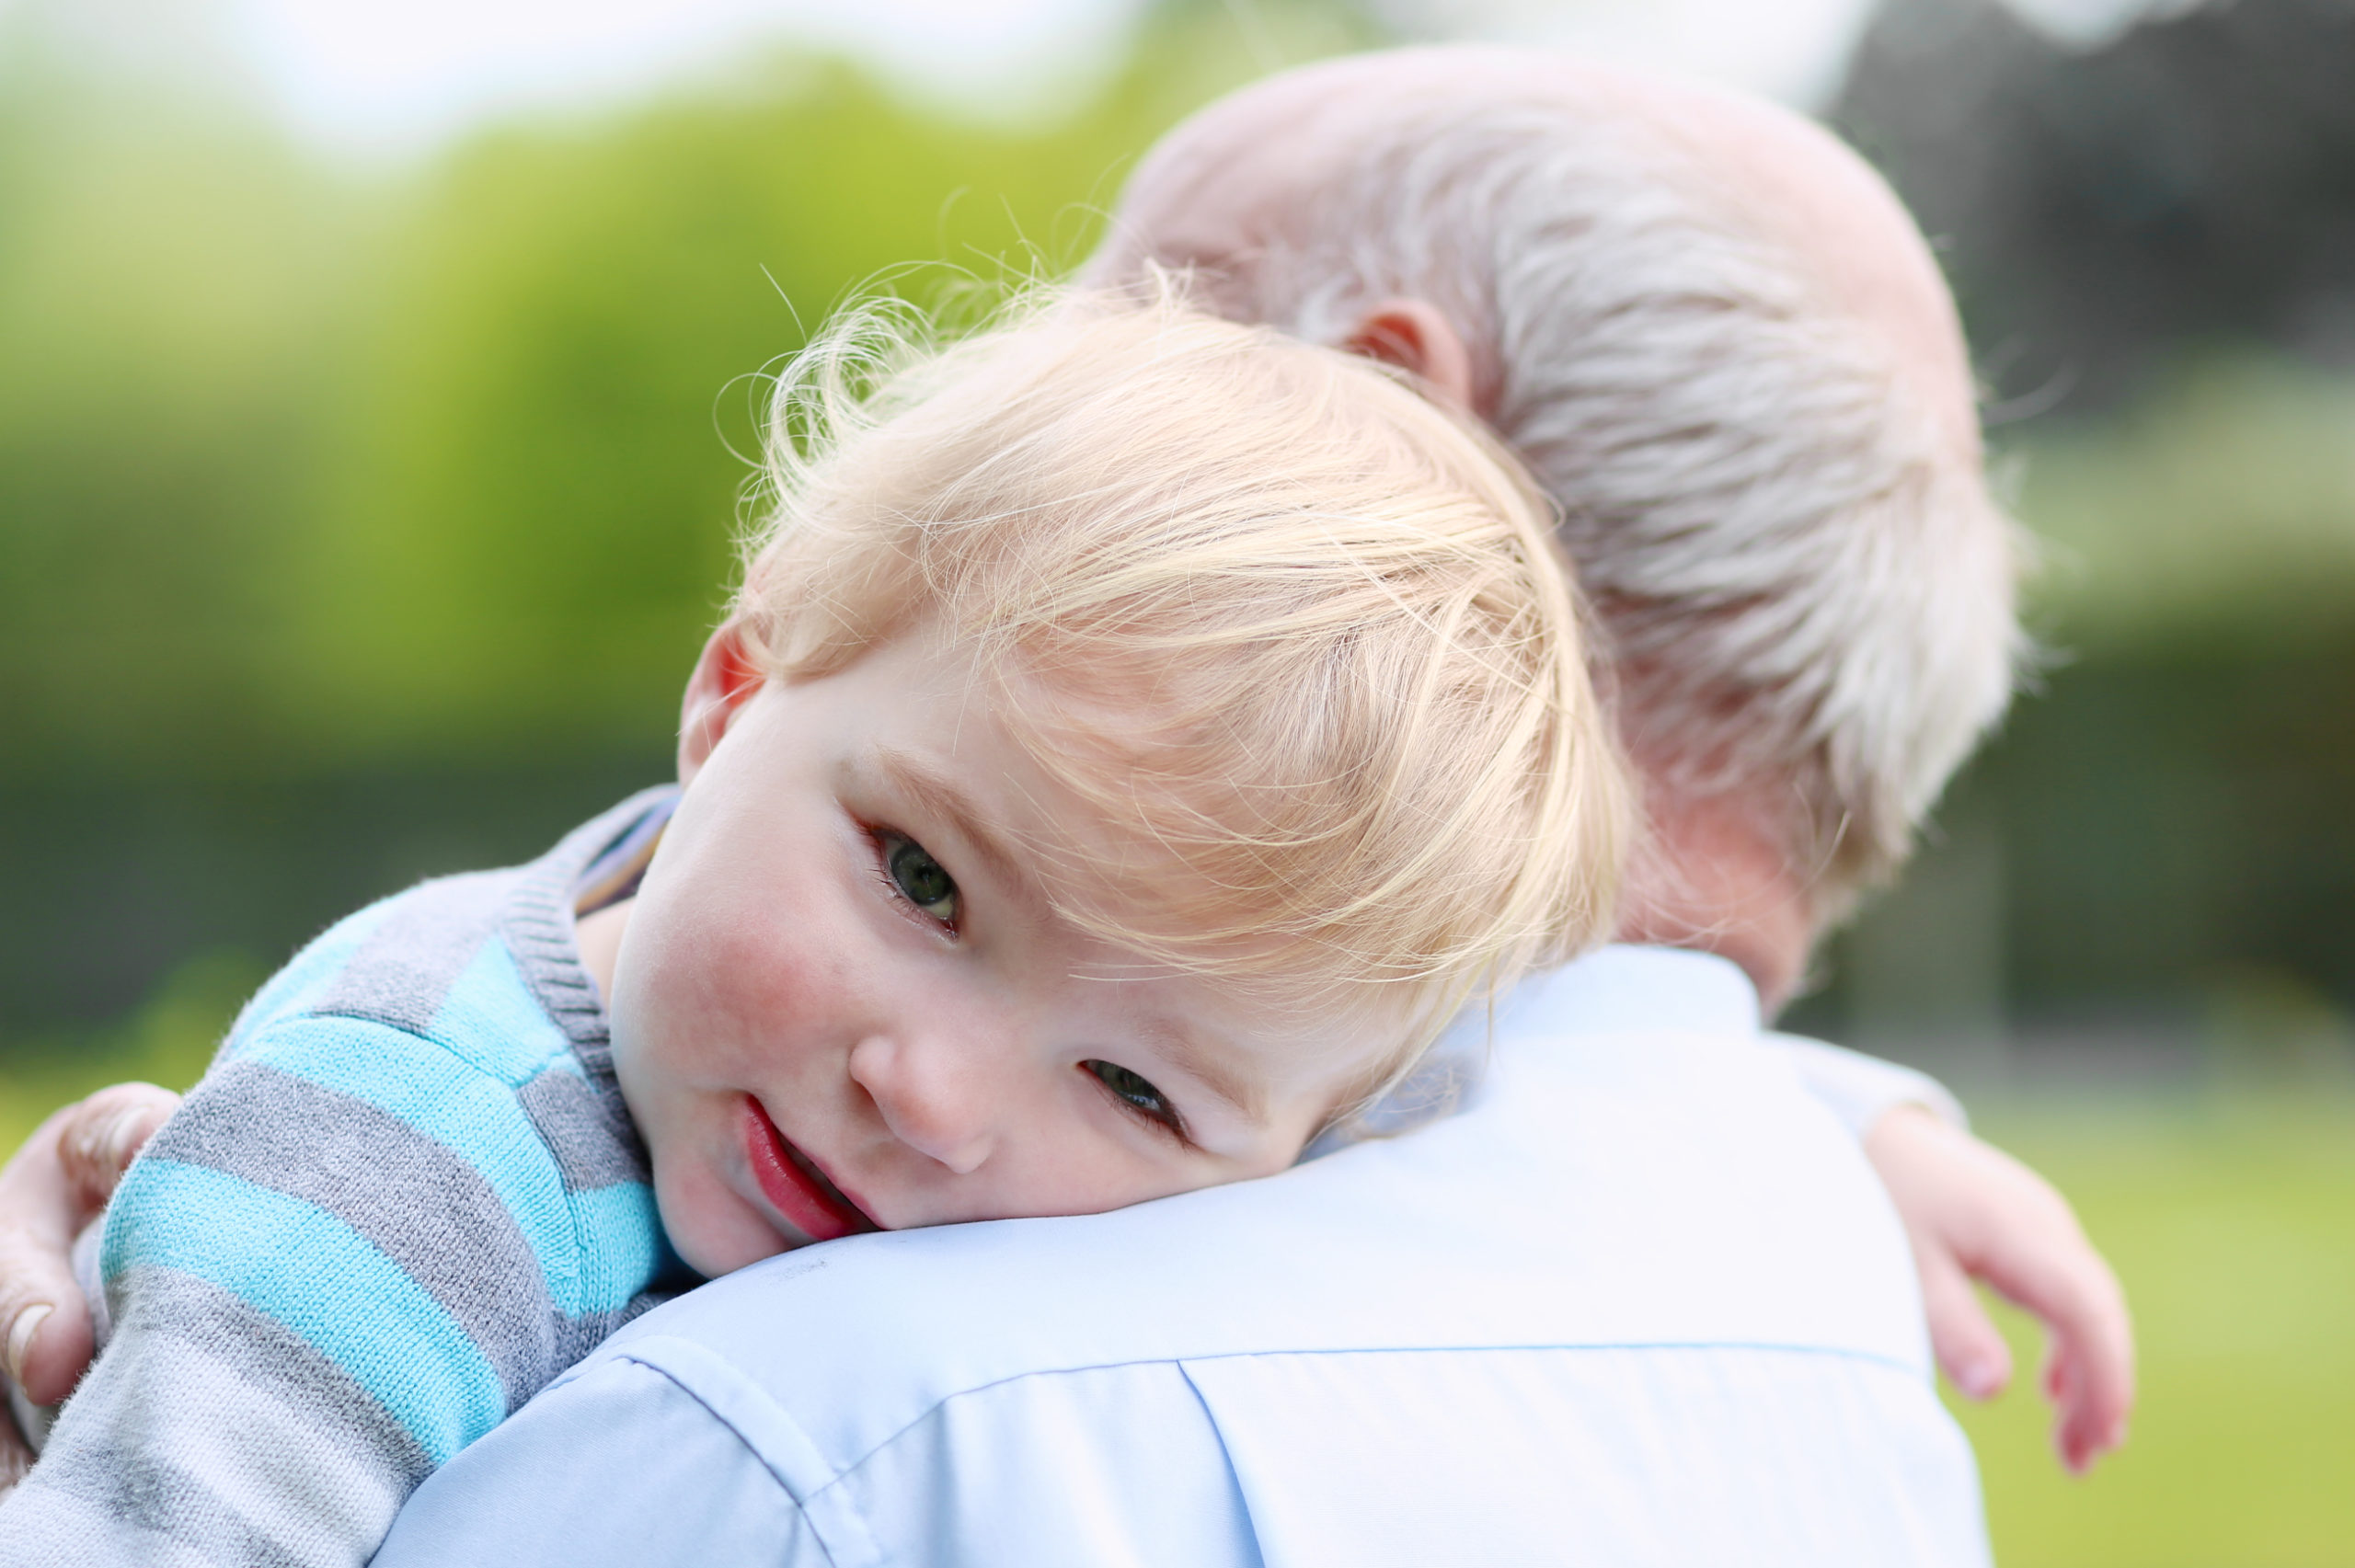 The announcement is good news for grandparents in need of a hug.